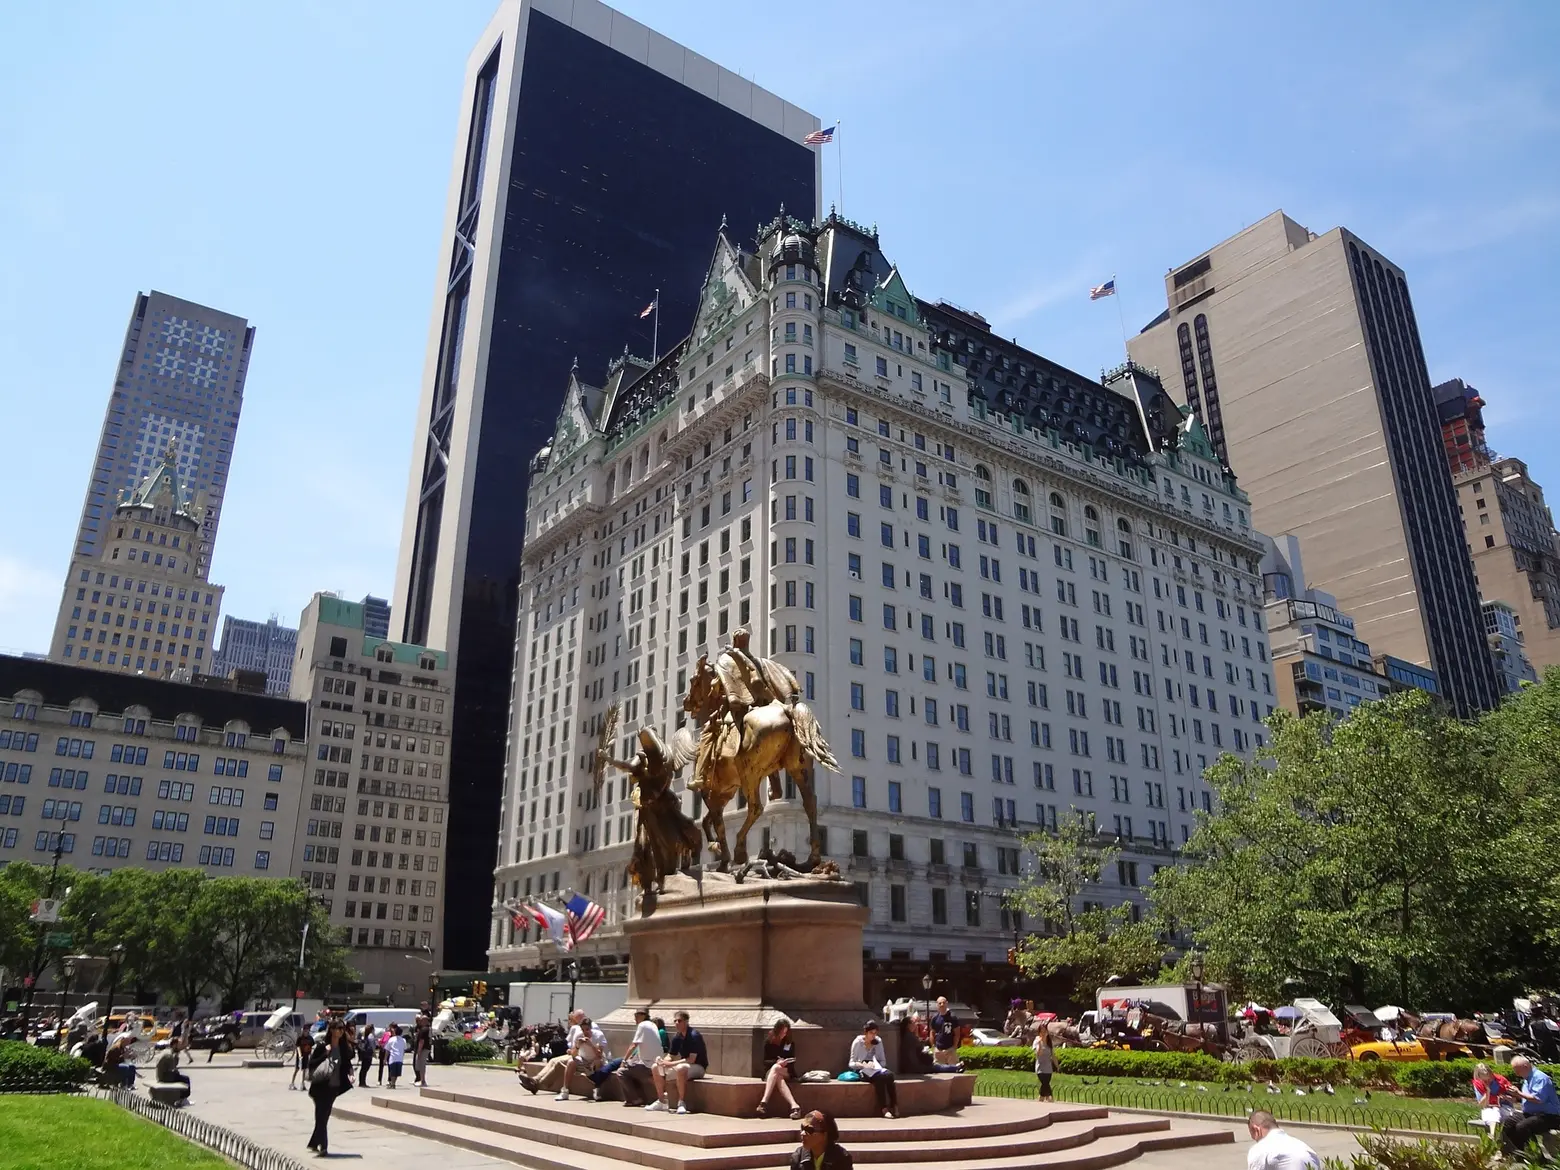 With a tourism comeback expected in NYC, the Plaza sets reopening date